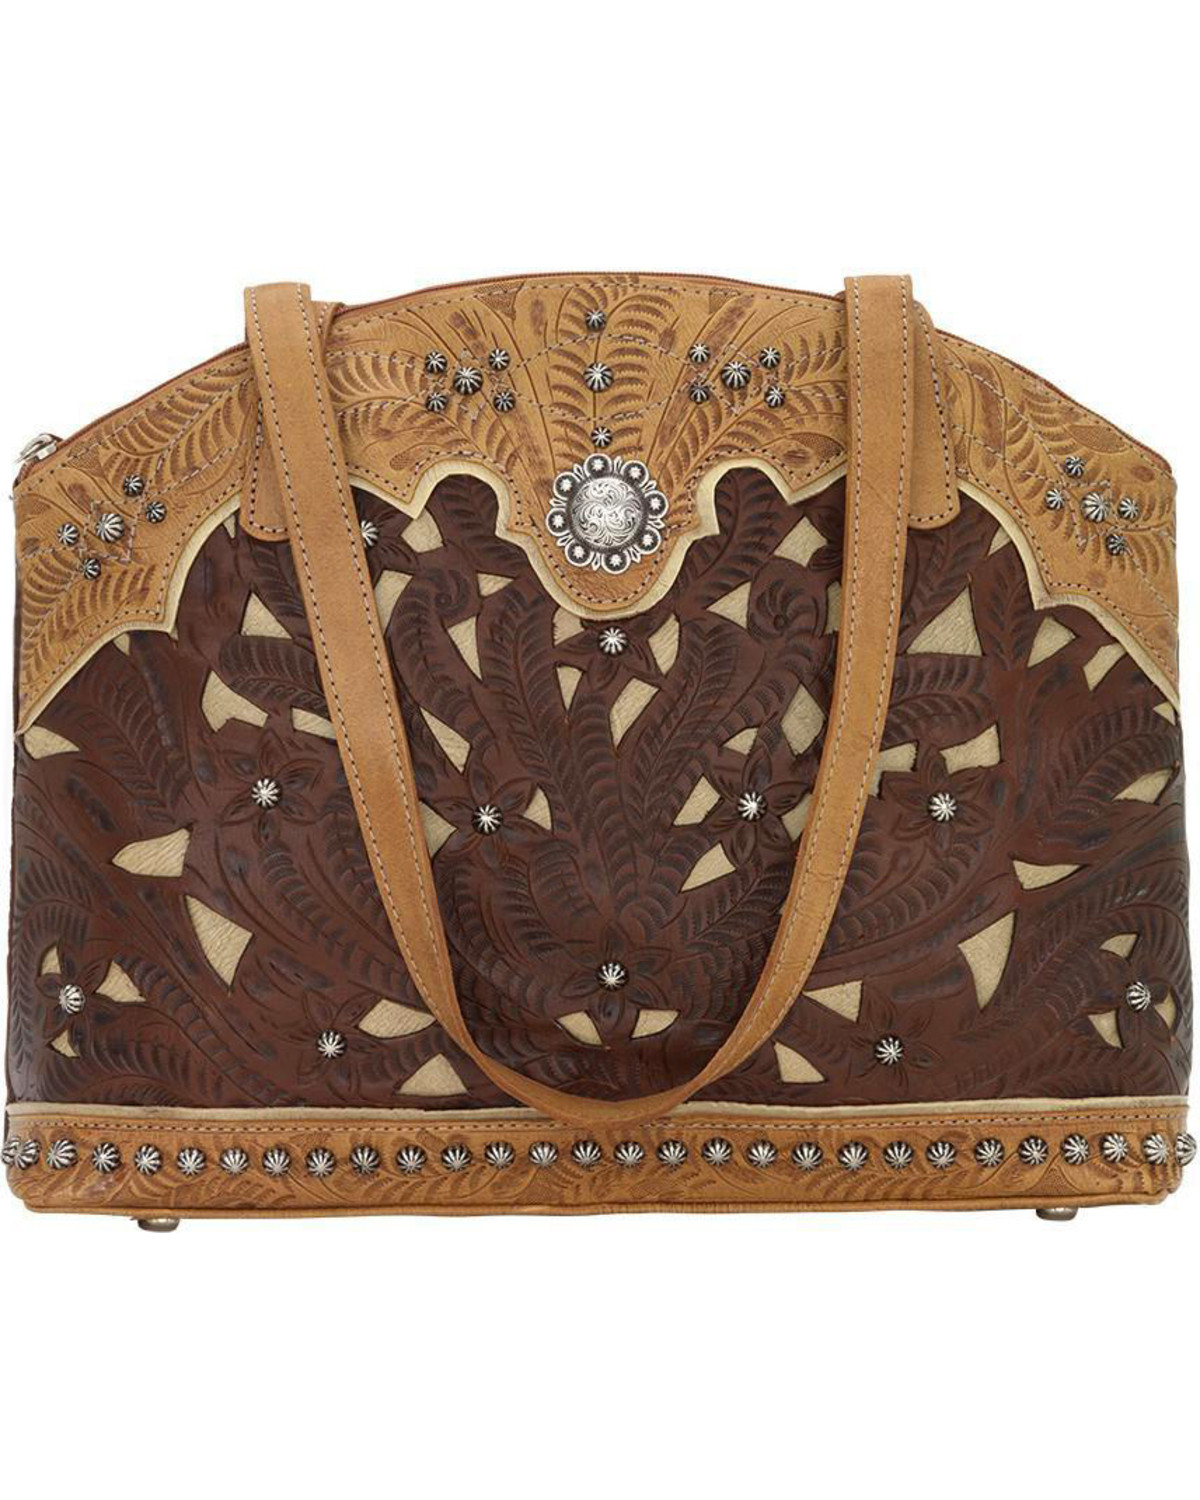 American West Women's Annie's Concealed Carry Half Moon Purse